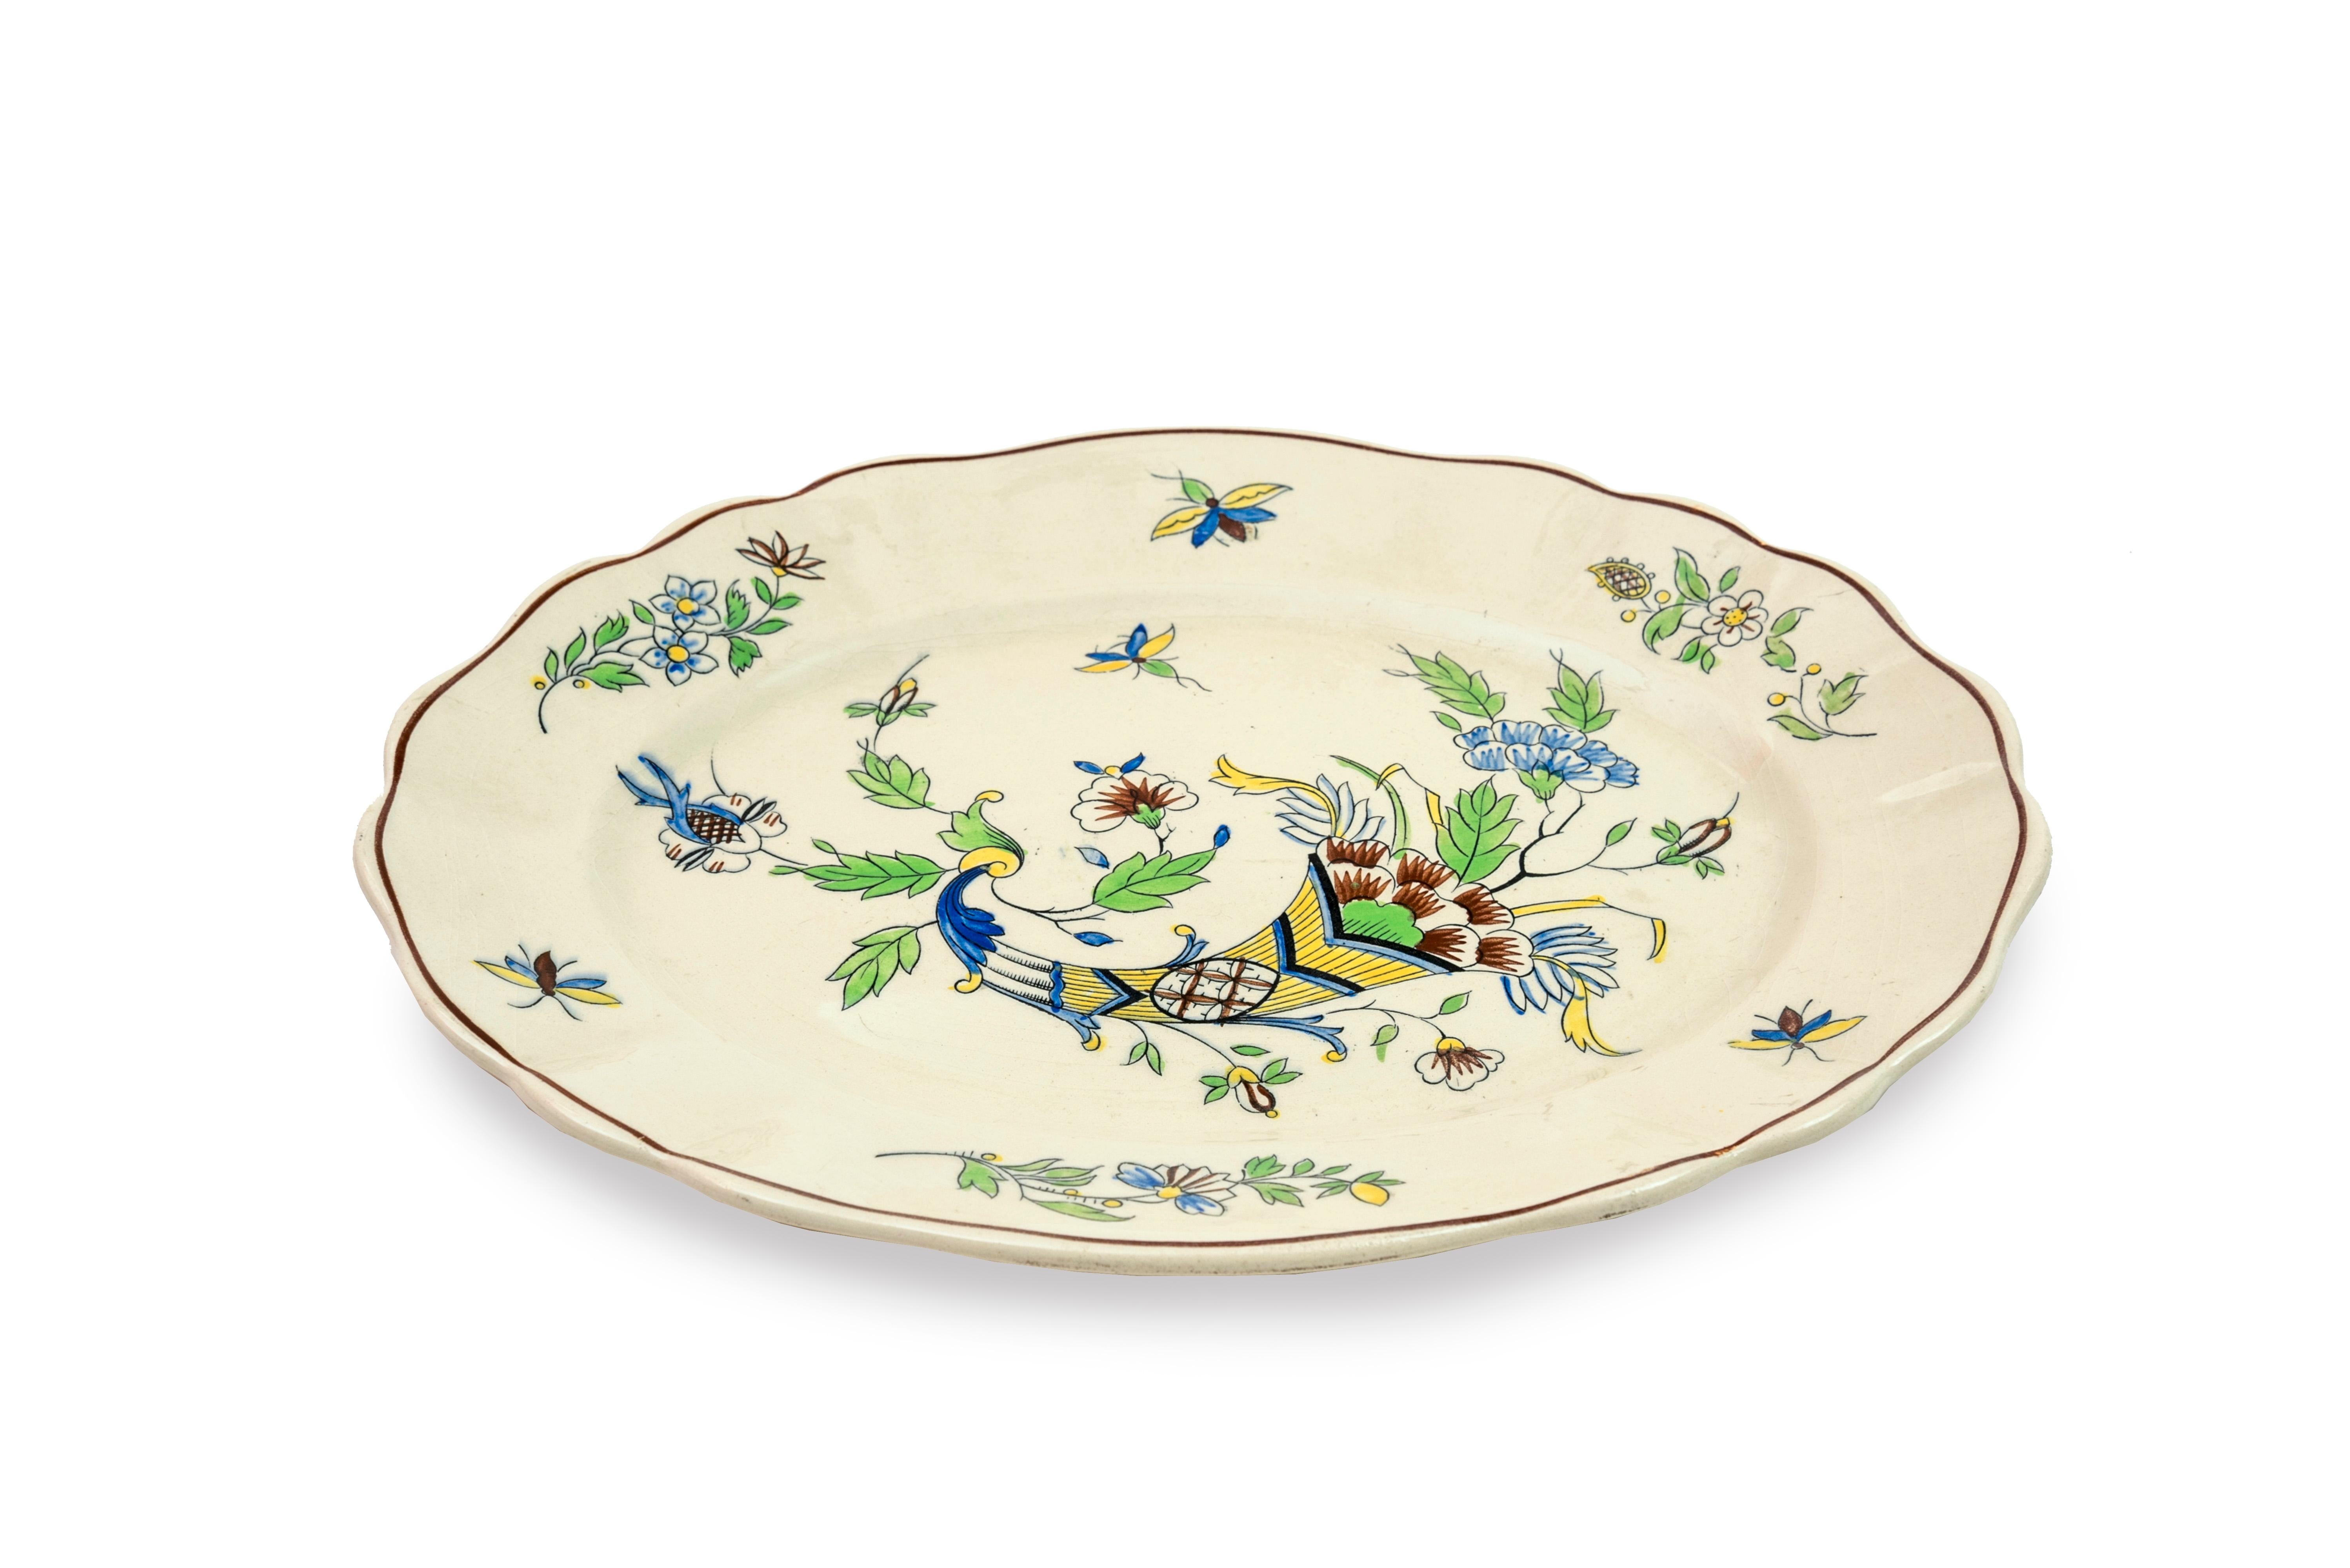 Table Service with Cornucopias, Keramis, Boch Freres, Early 20th Century For Sale 4